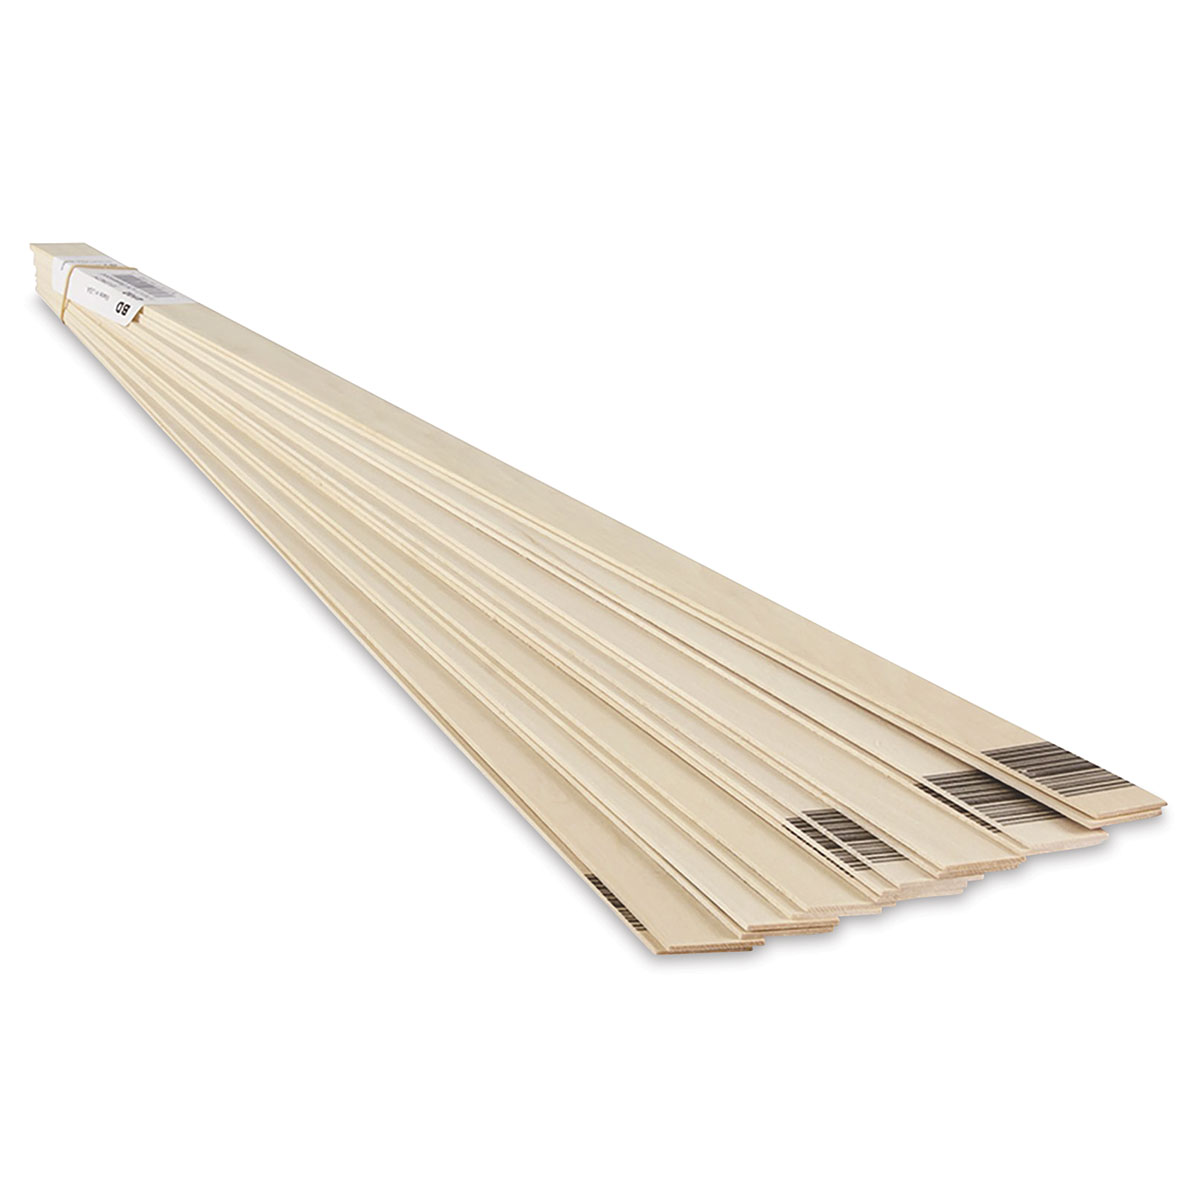 Midwest Products 4102 Basswood Strip 1/16x1x24